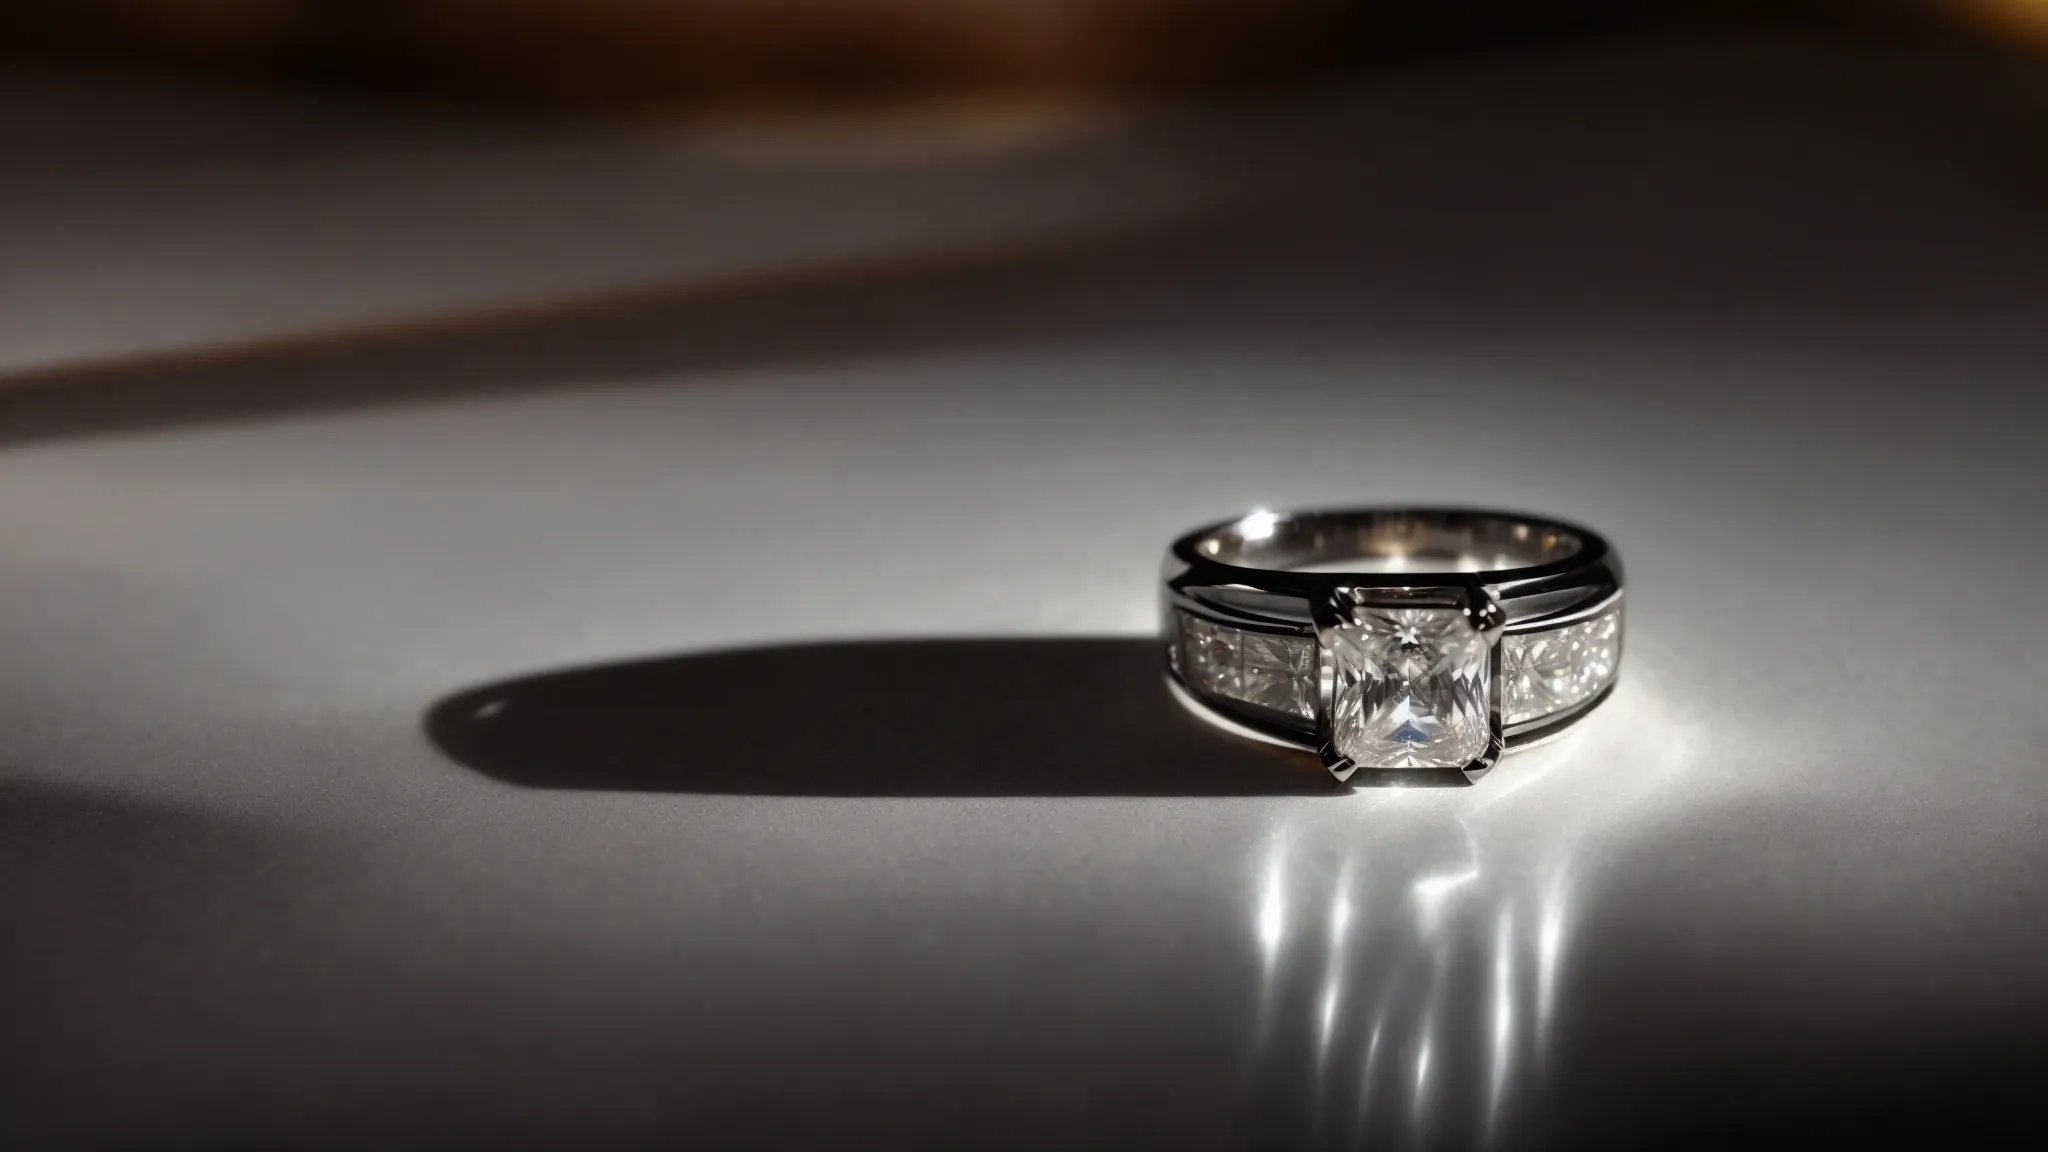 a gleaming platinum ring rests on a velvet surface, unaware of the shadowy figure of a chemical bottle looming in the background.